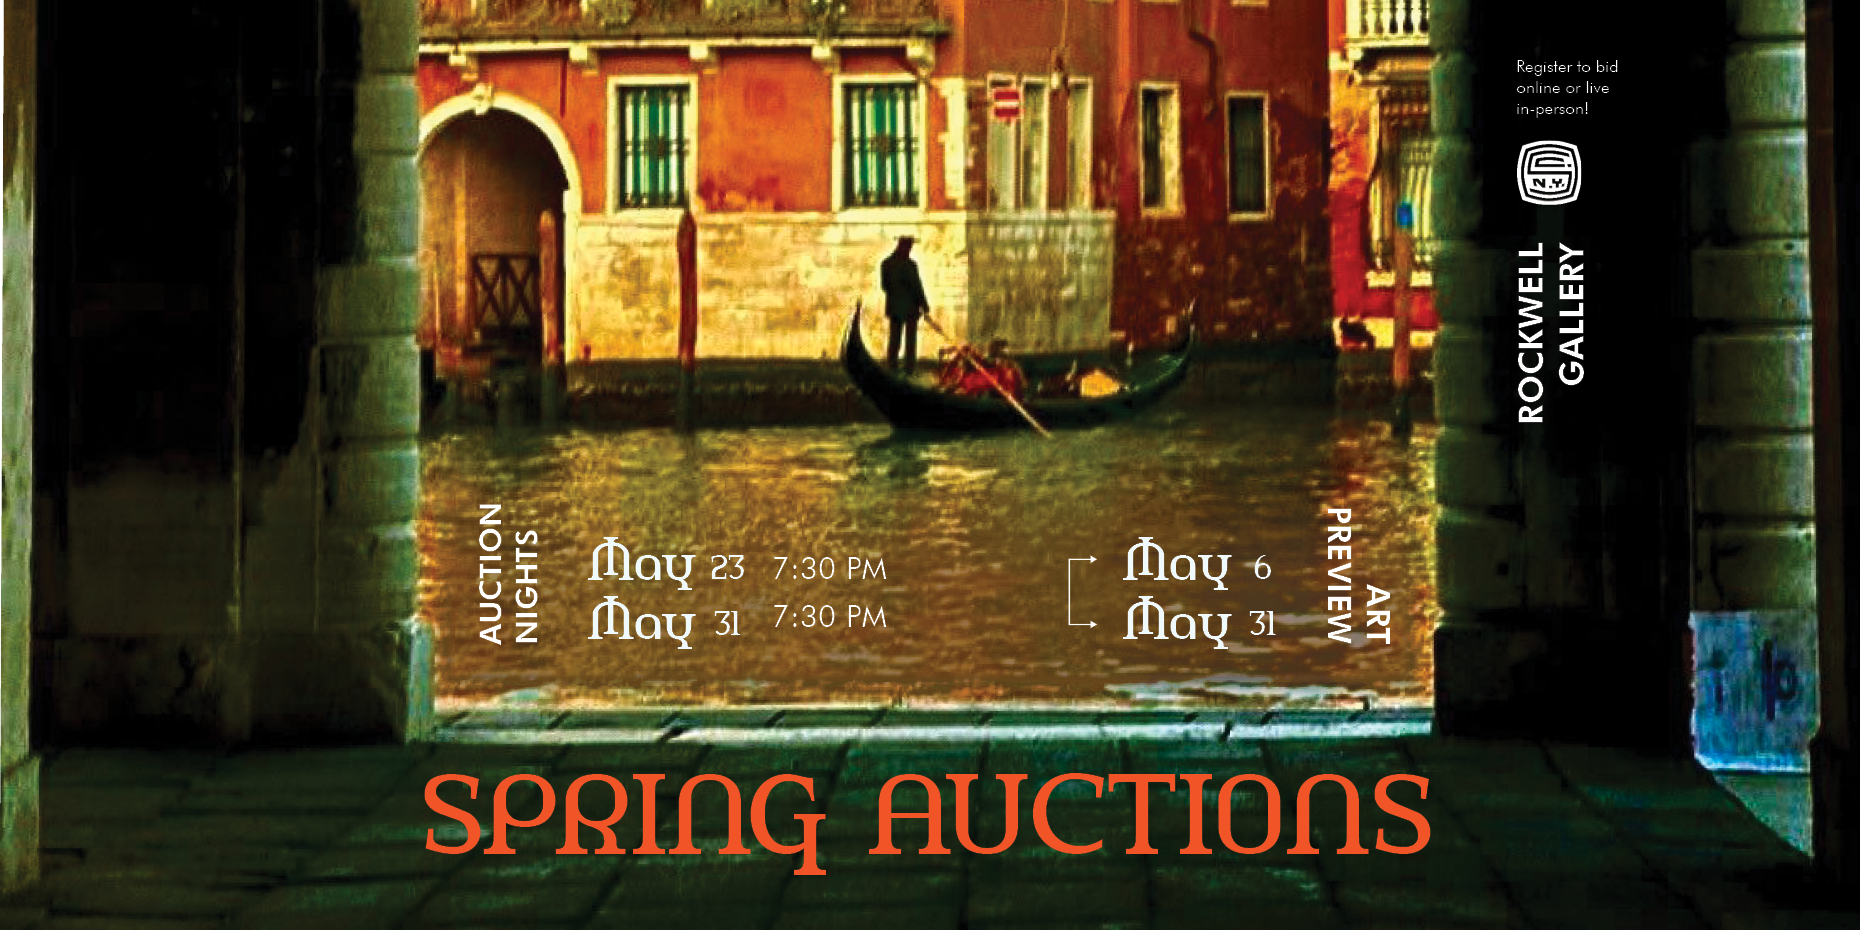 Promotional poster for "spring auctions" featuring a gondola on a venice canal at night, with event dates and online registration details.